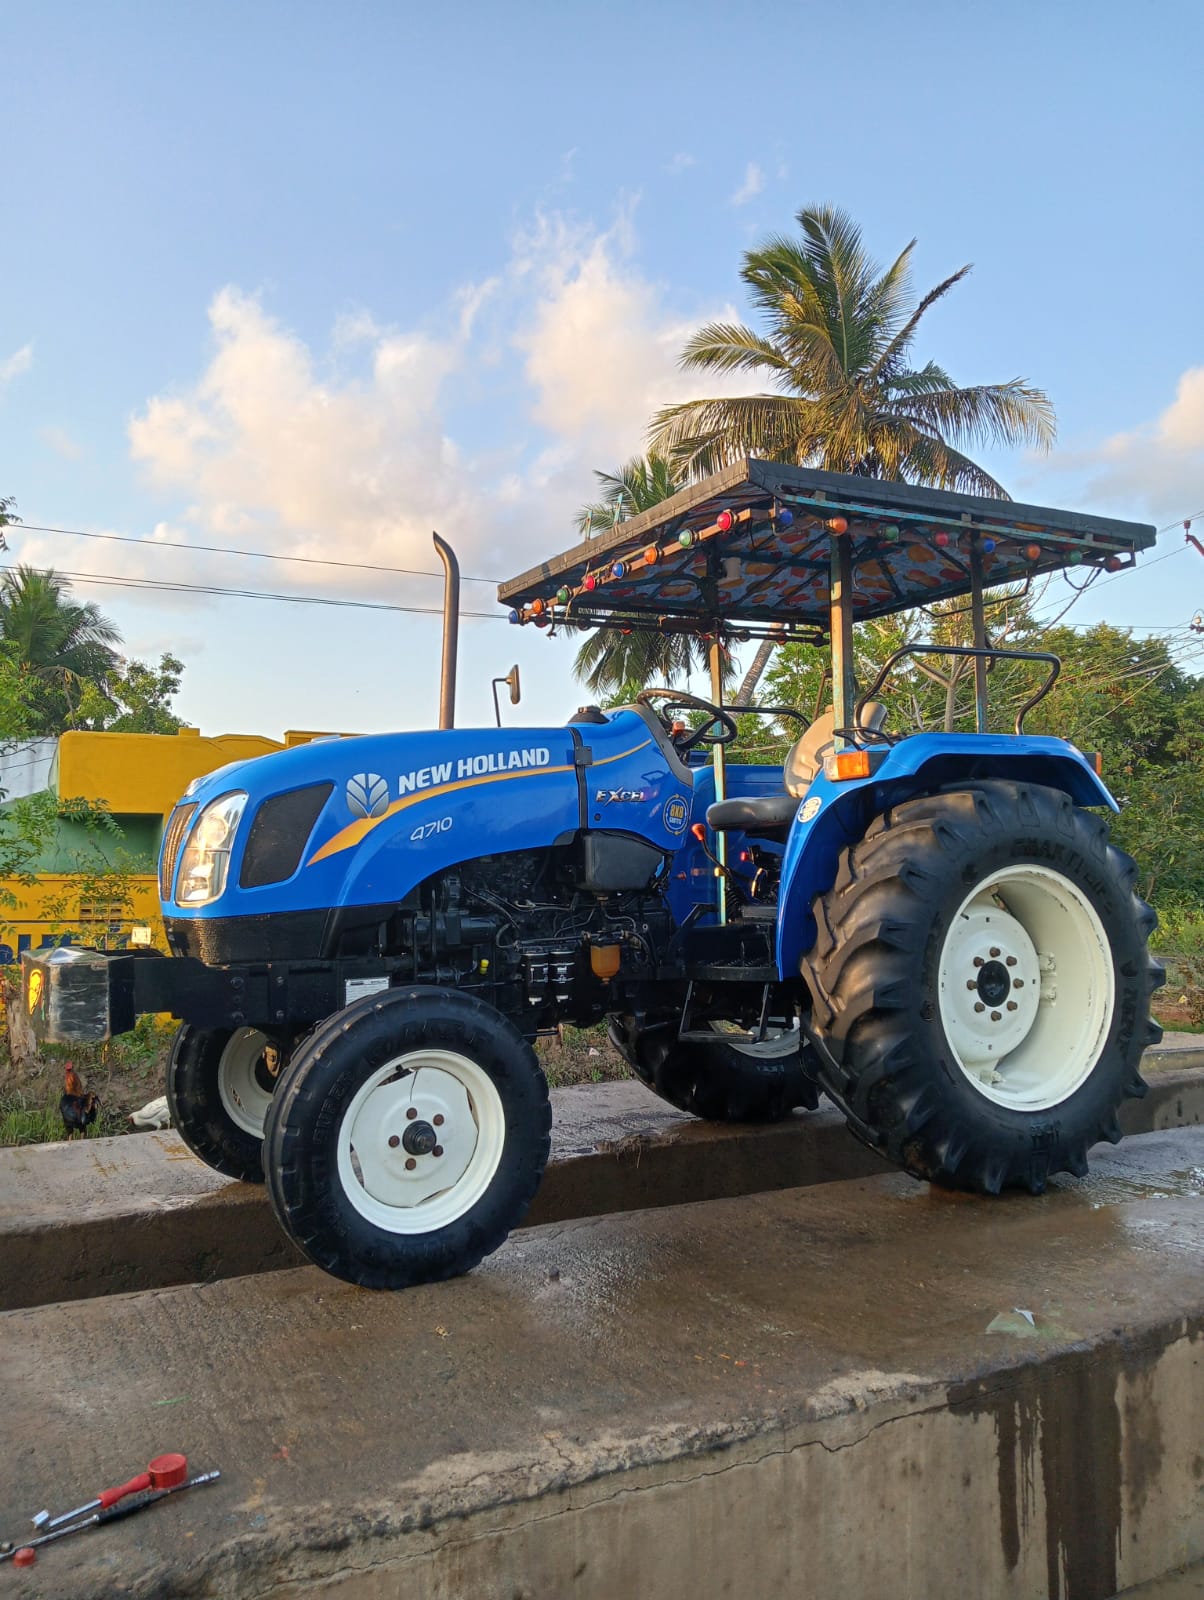 Used New Holland 4710 Tractor sales in Tamilnadu